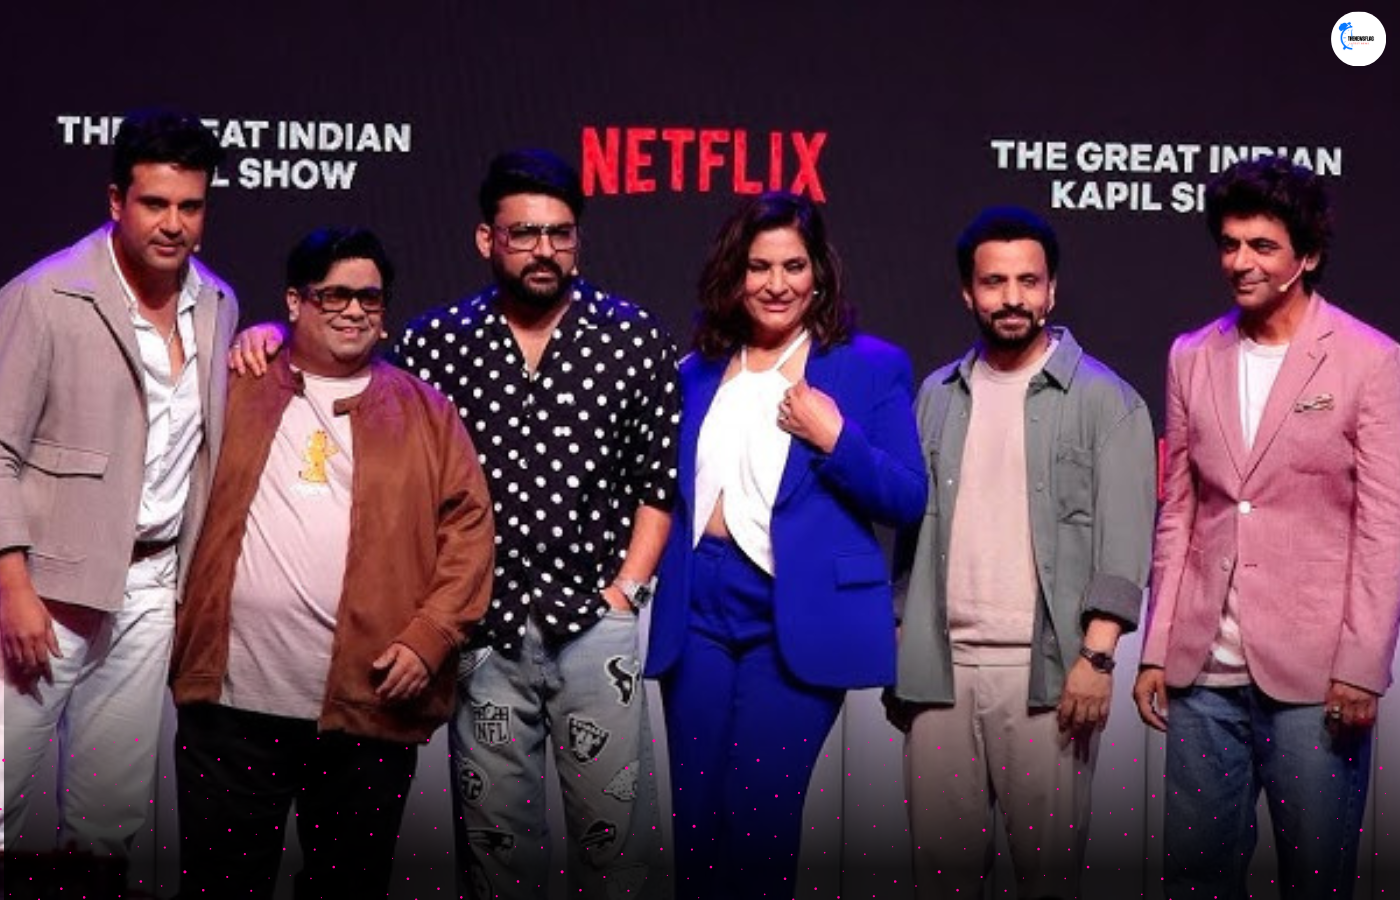 The Great Indian Kapil Show Cast Per Episode Salary 2024?